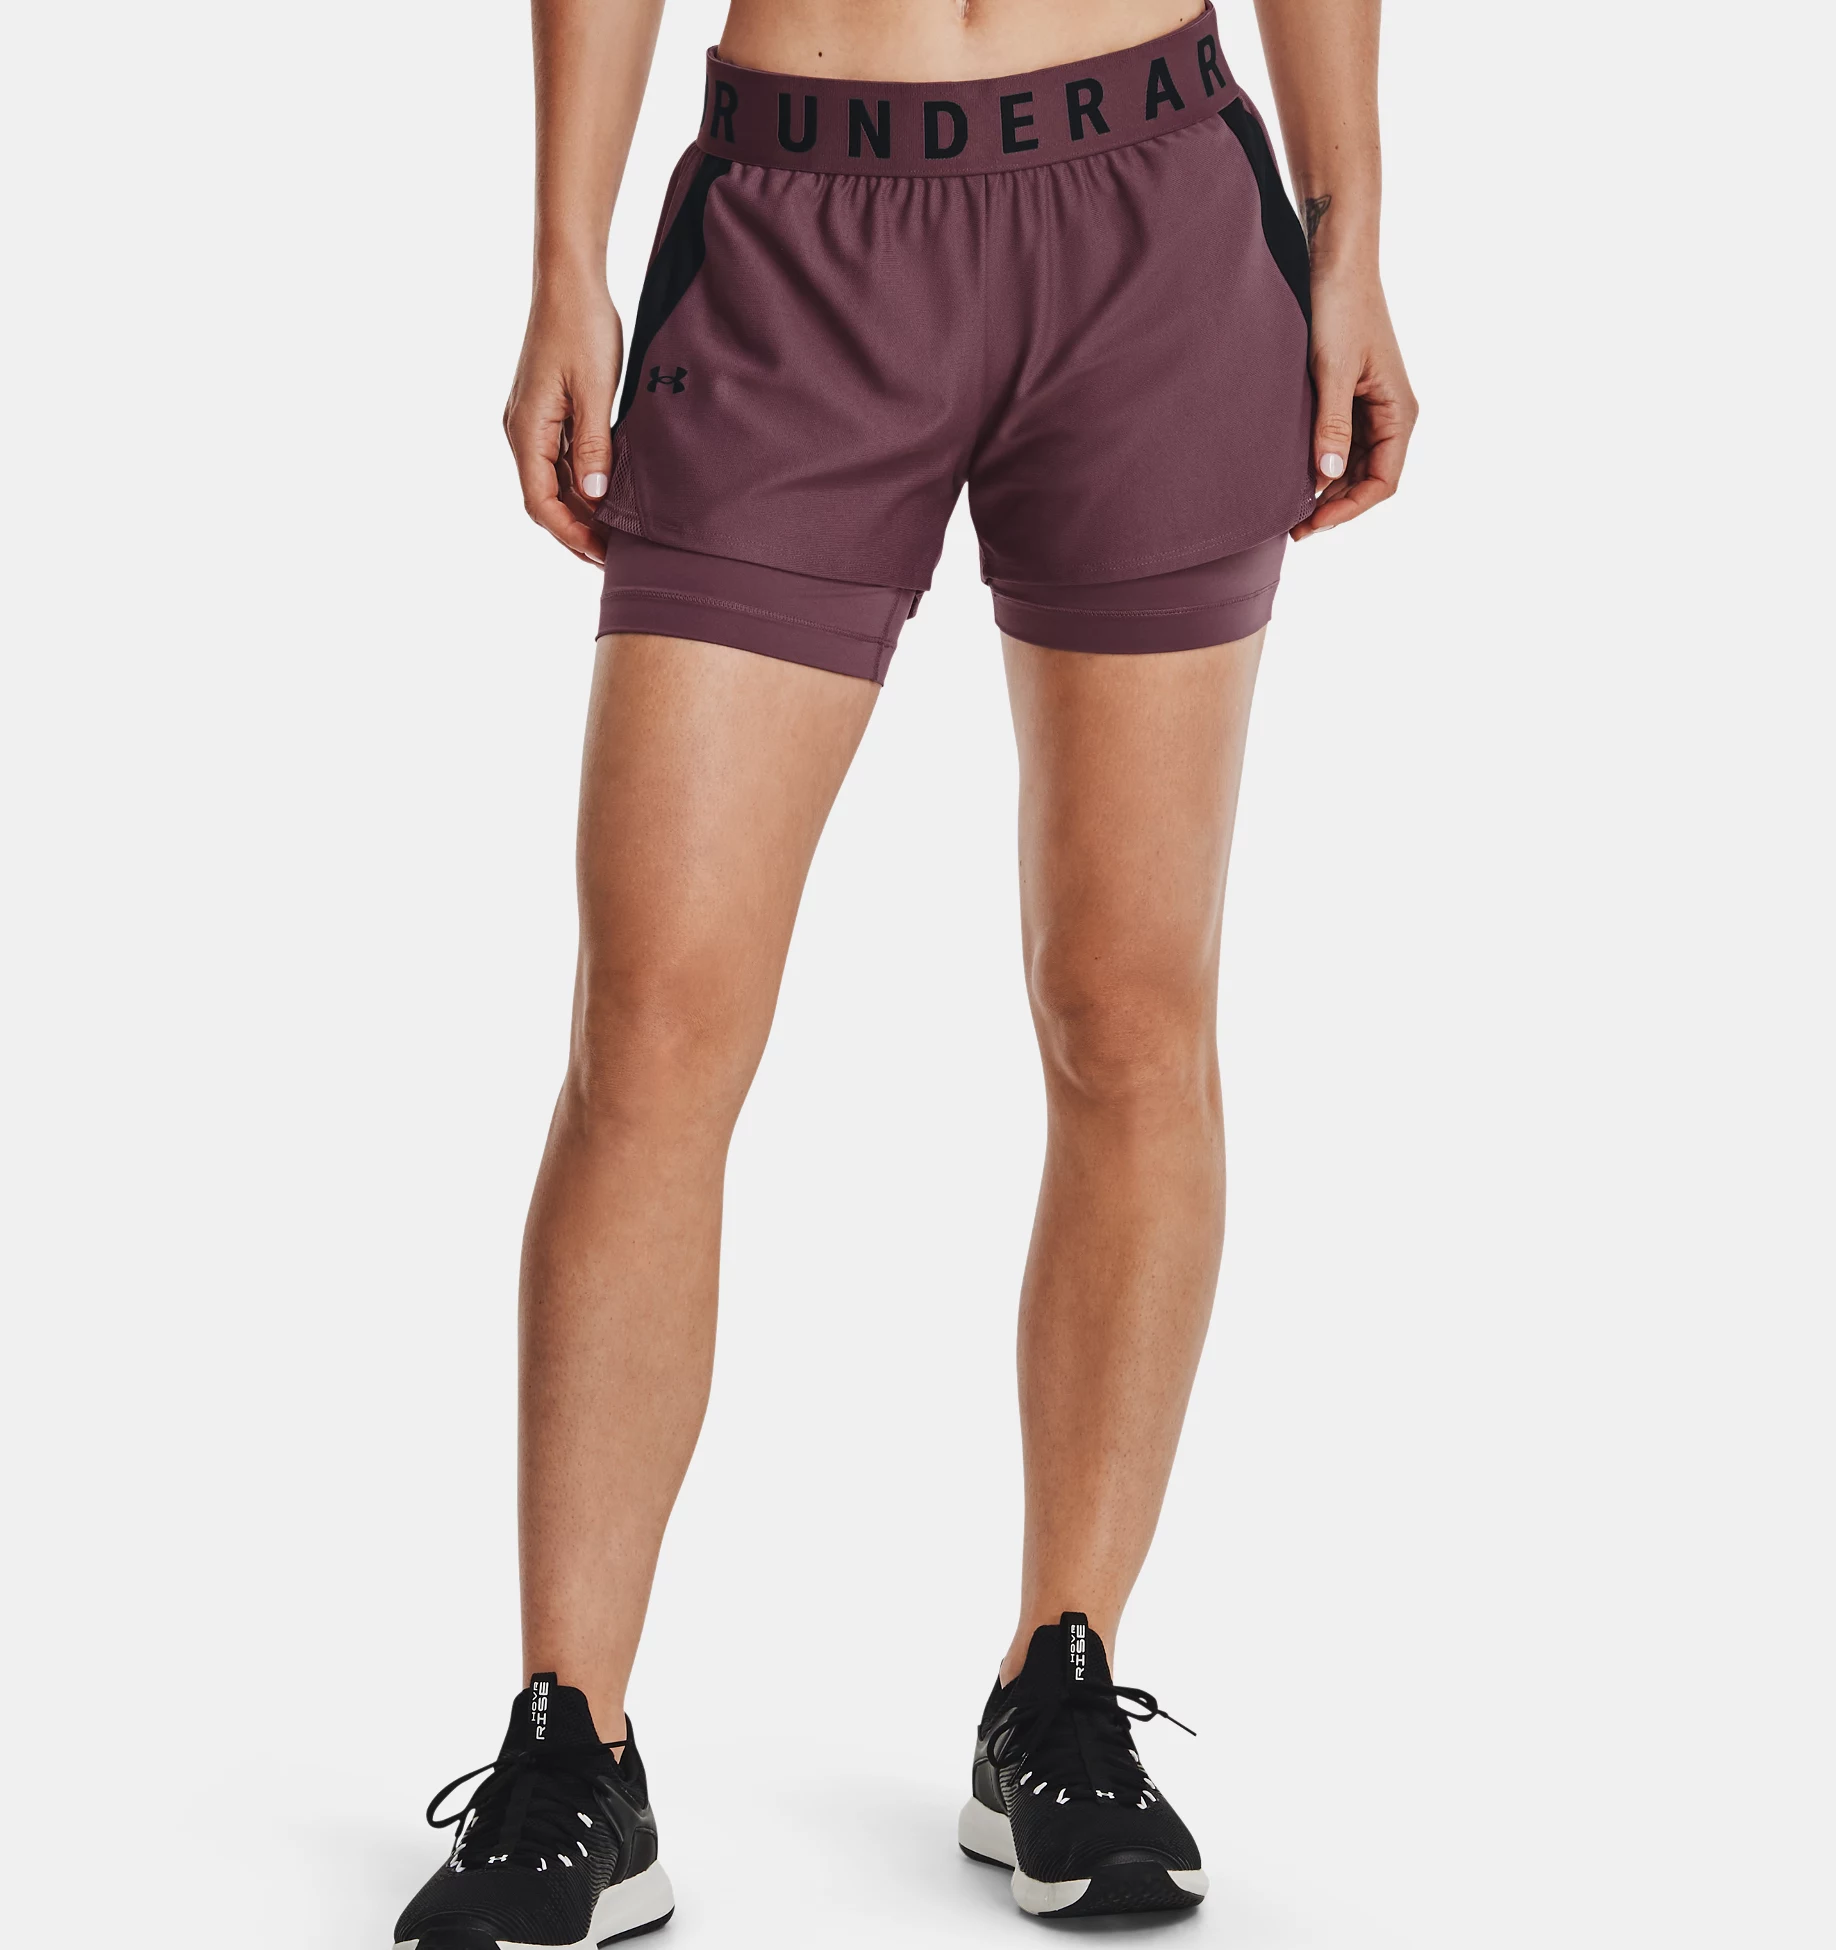 Under Armour offers a great 2-1 short that has a running short over spandex. Find them at UnderArmour.com